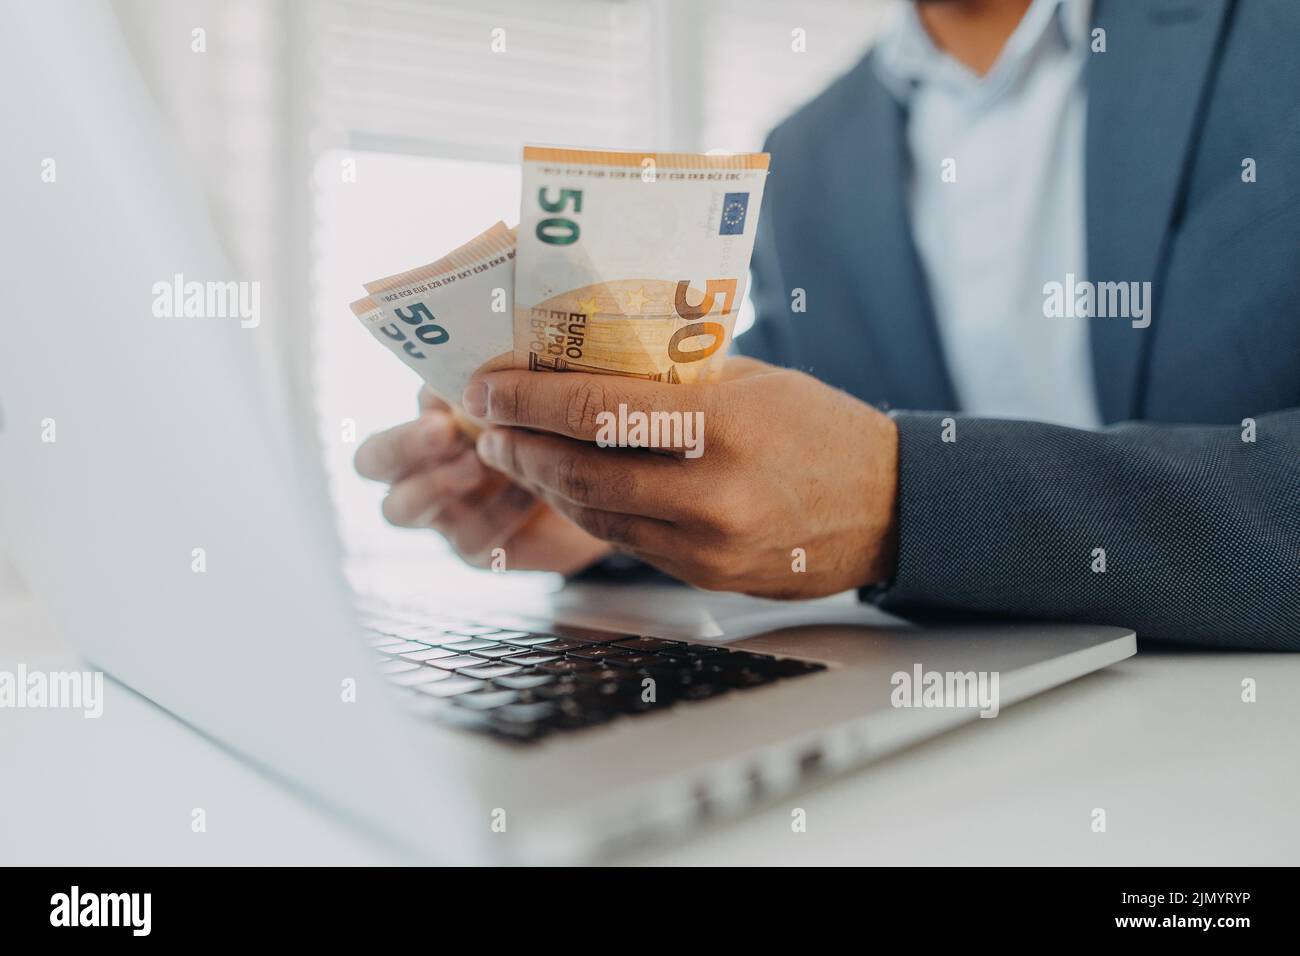 Businessman man with euro money in his hands is working on a computer keyboard at office desk, close-up Stock Photo